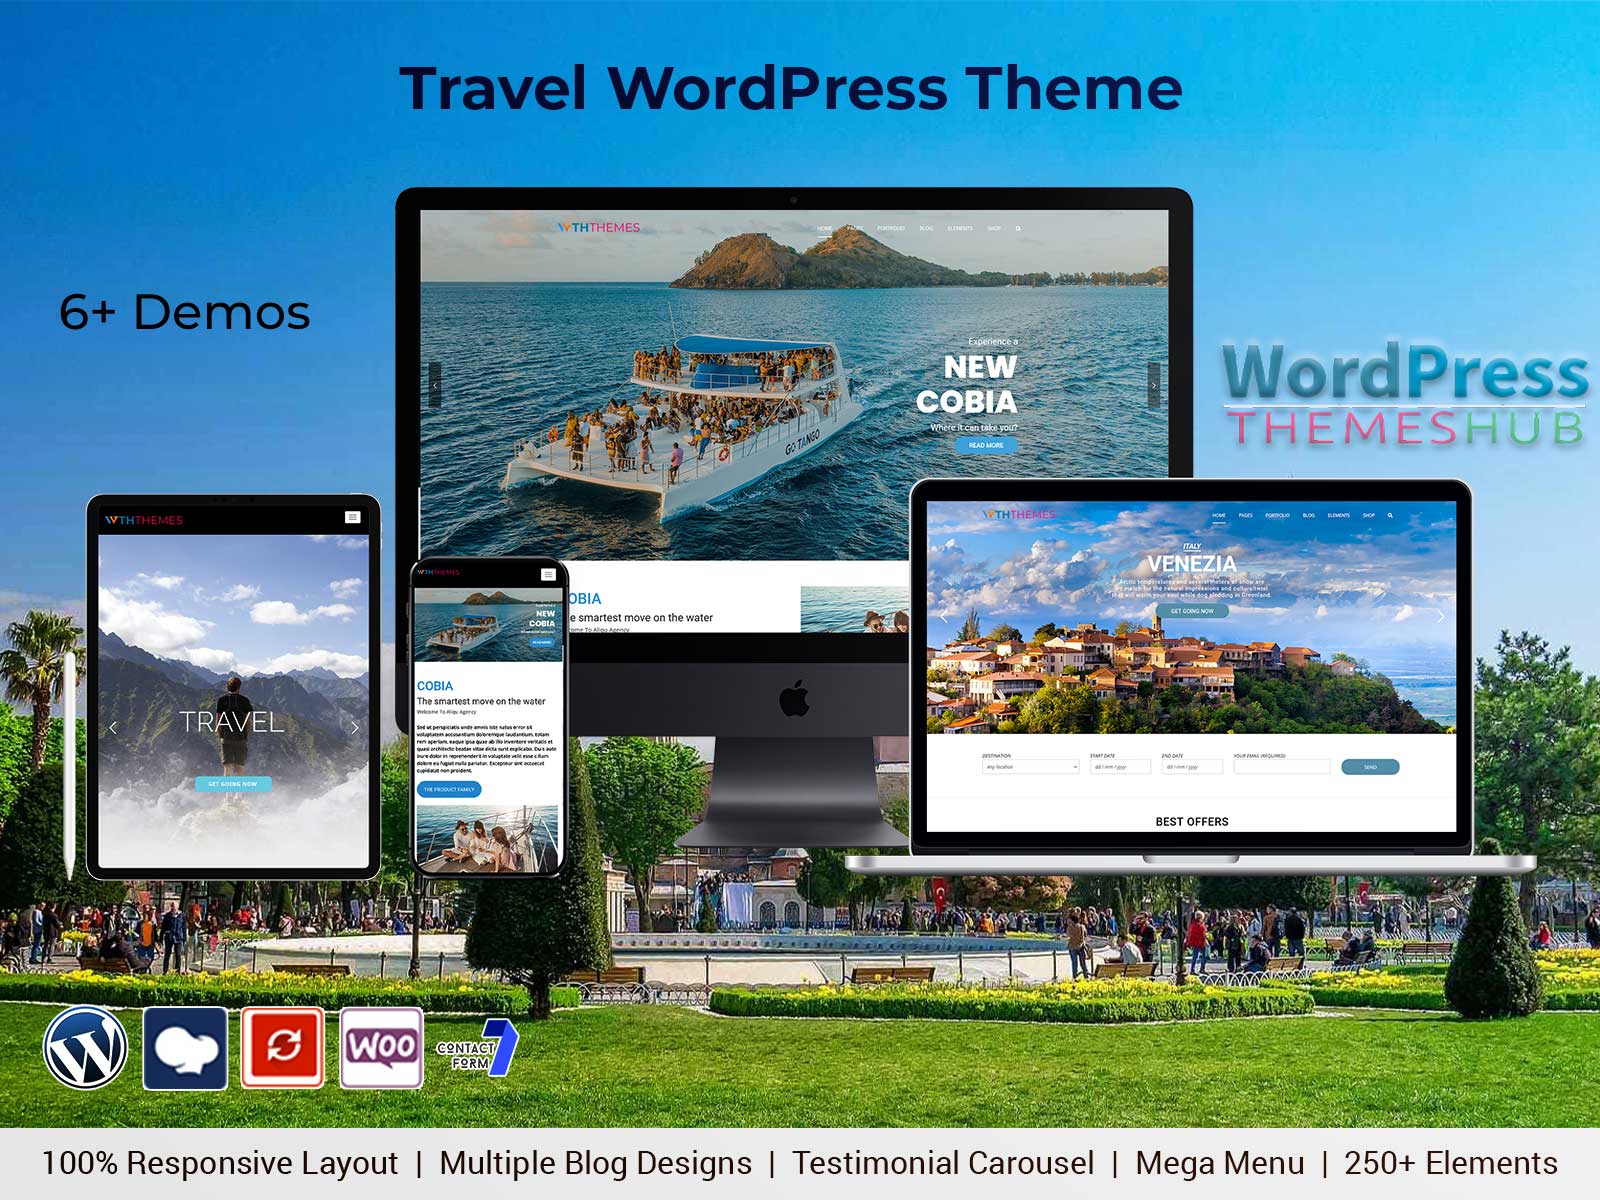 Travel WordPress Theme For Travel Bogs, And Adventure Tourism Website